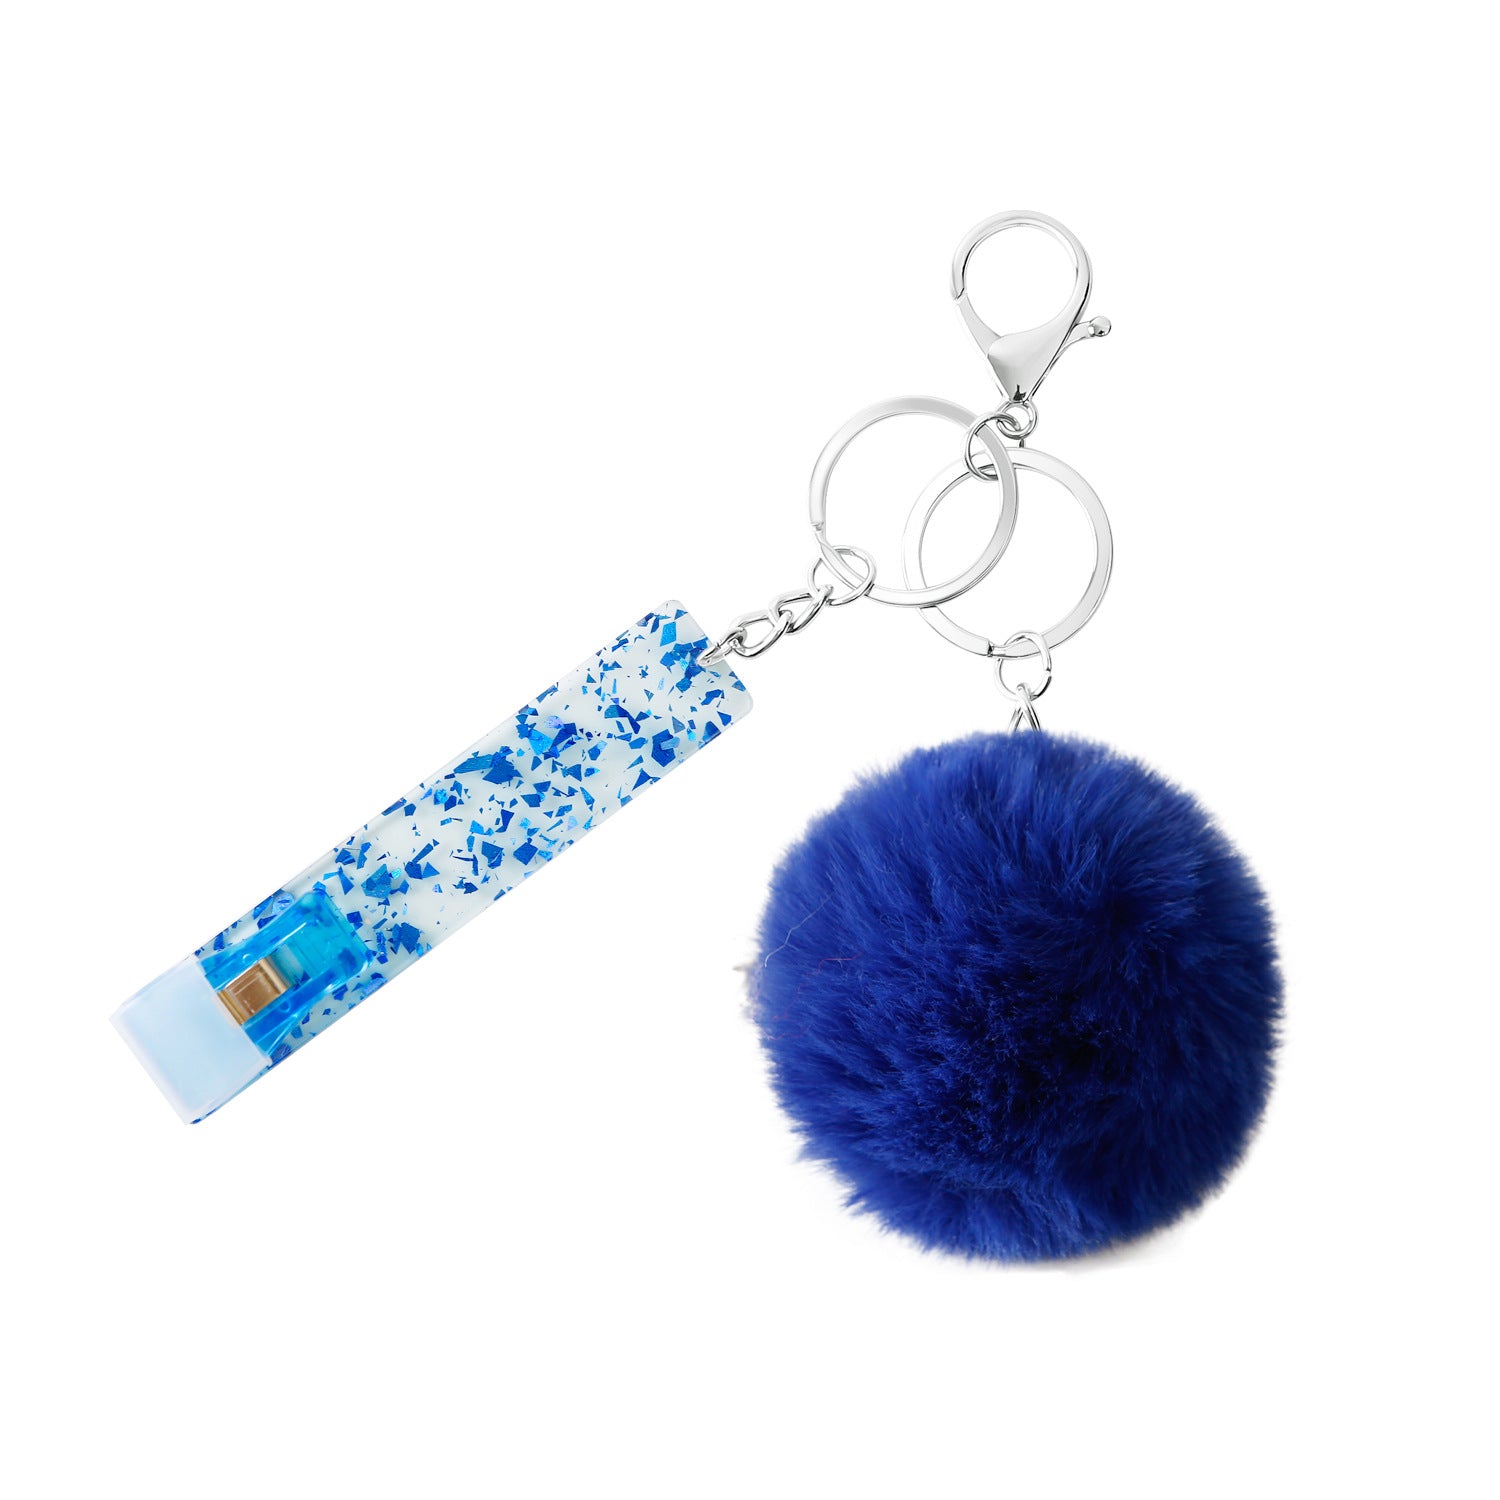 Wholesale Contactless ATM Card Taker Acrylic Fur Ball Keychain